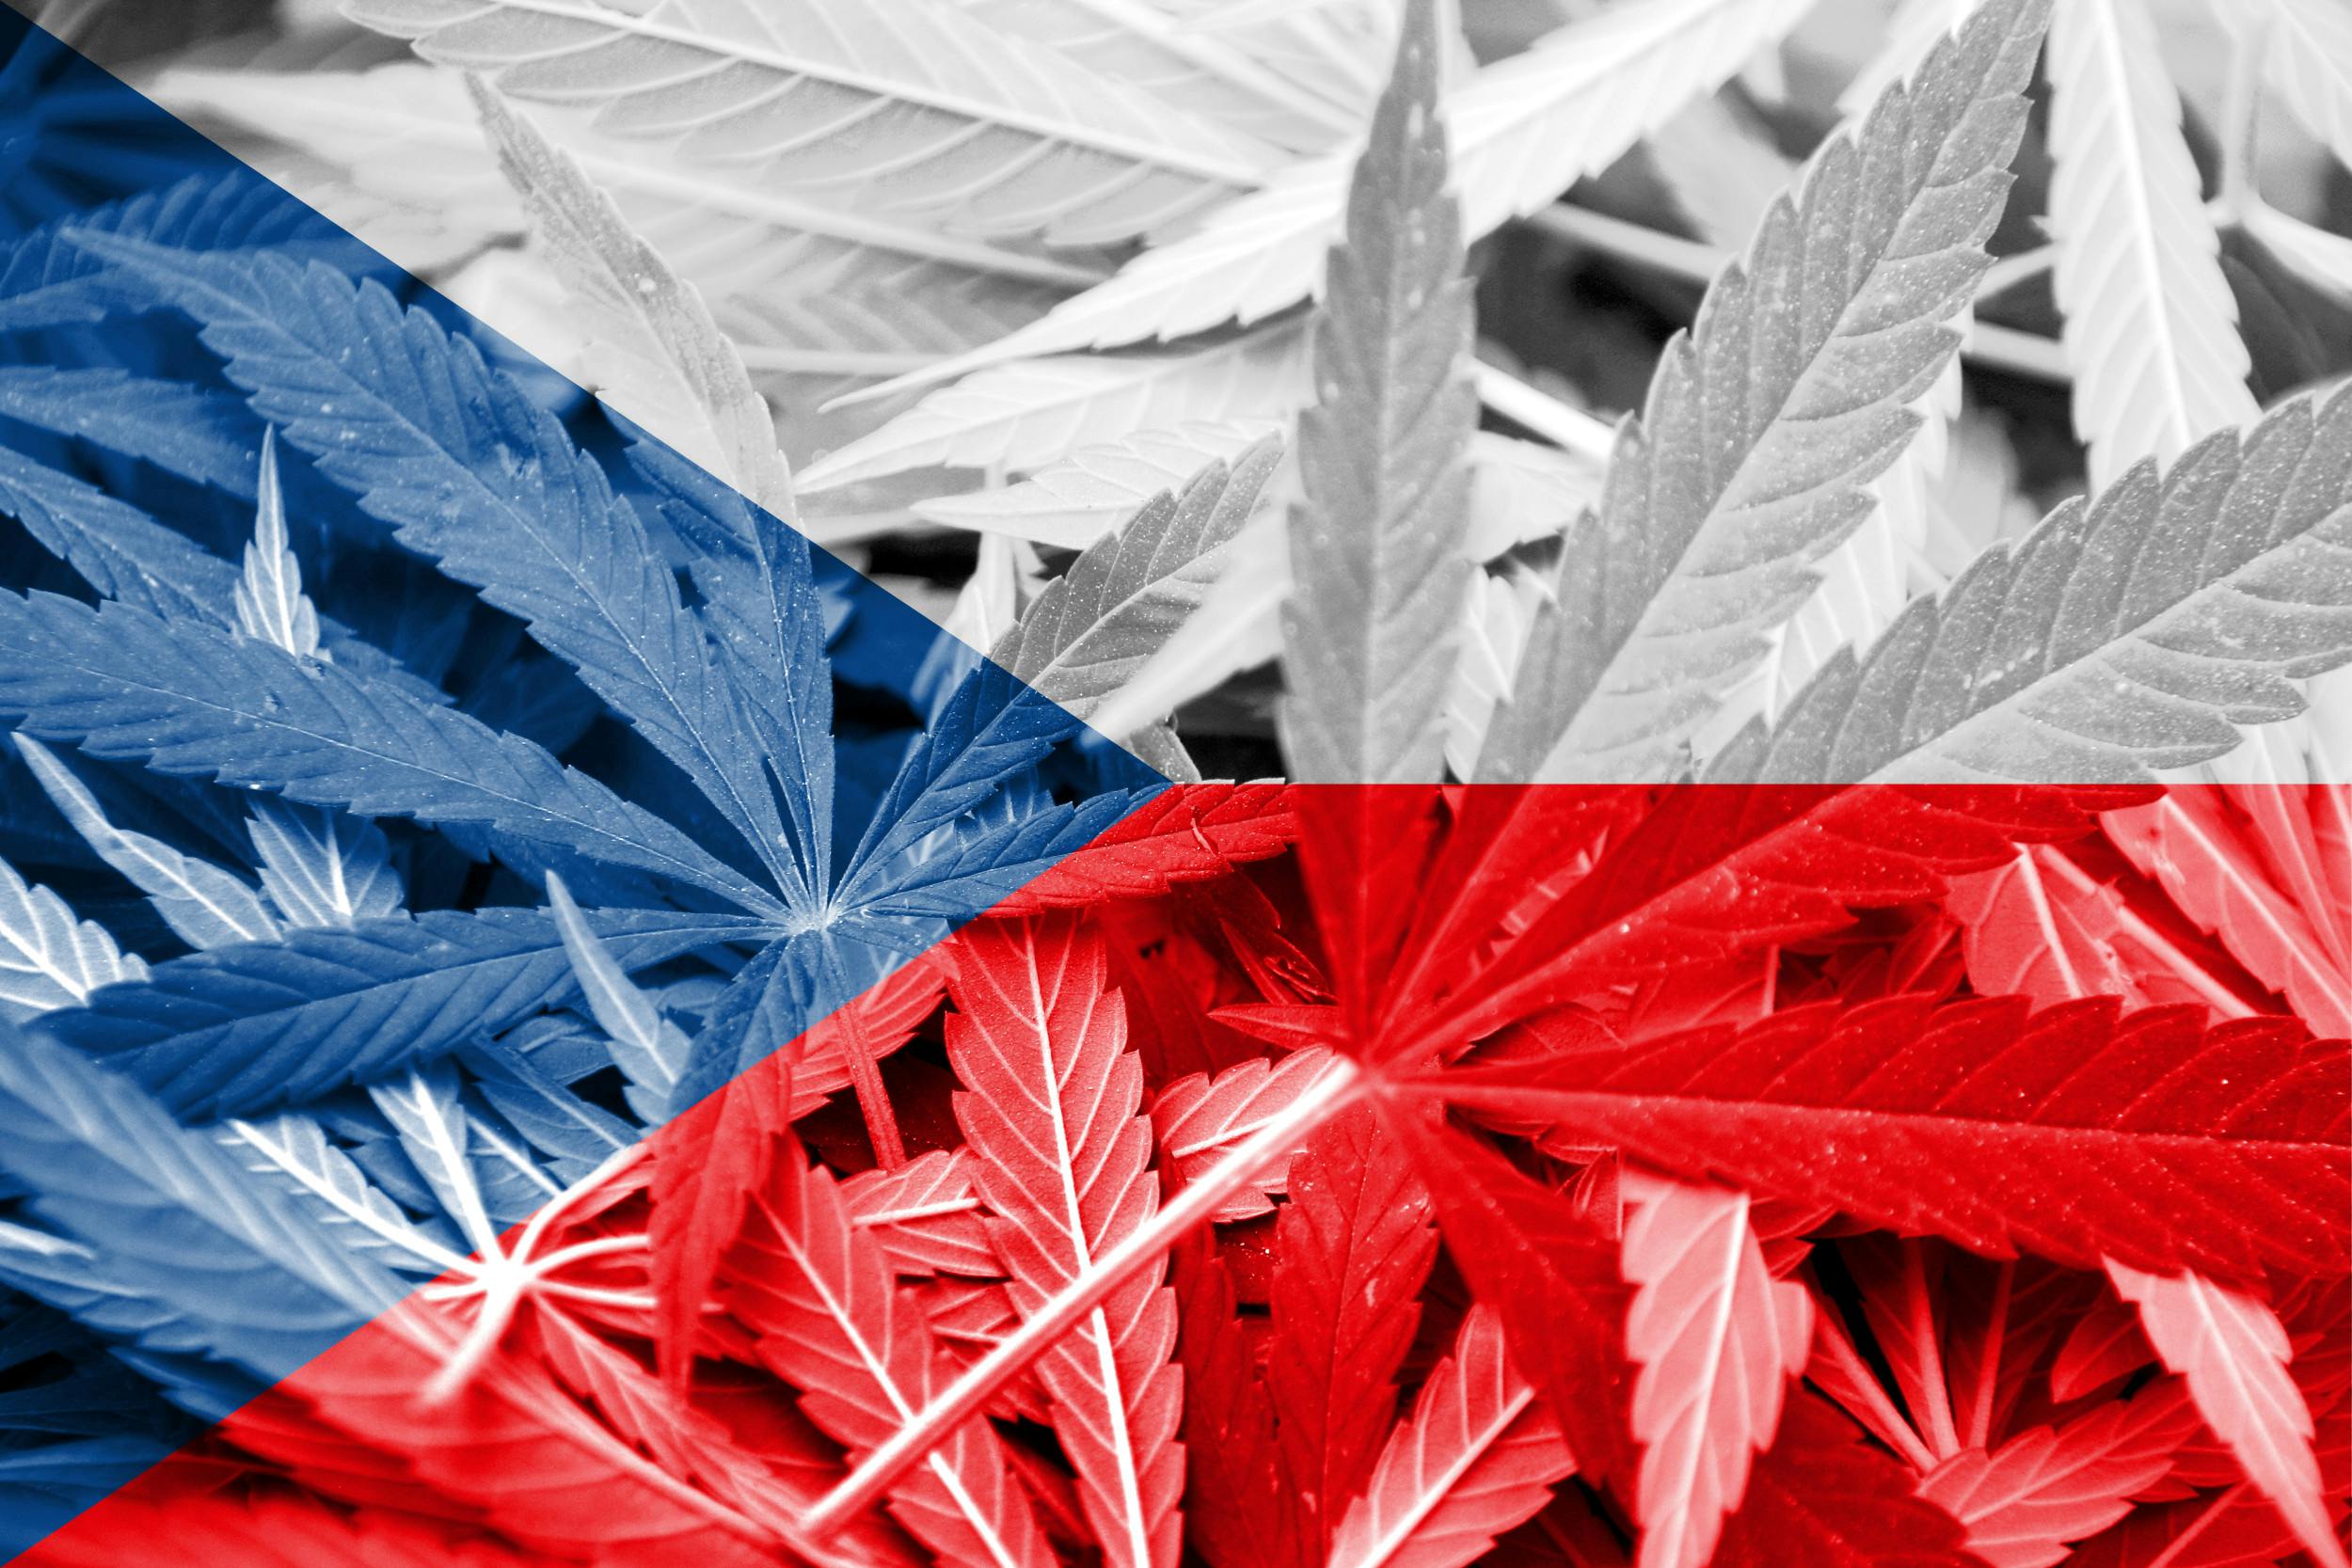 Following Germany's Lead: How Cannabis in the Czech Republic Stands to Benefit